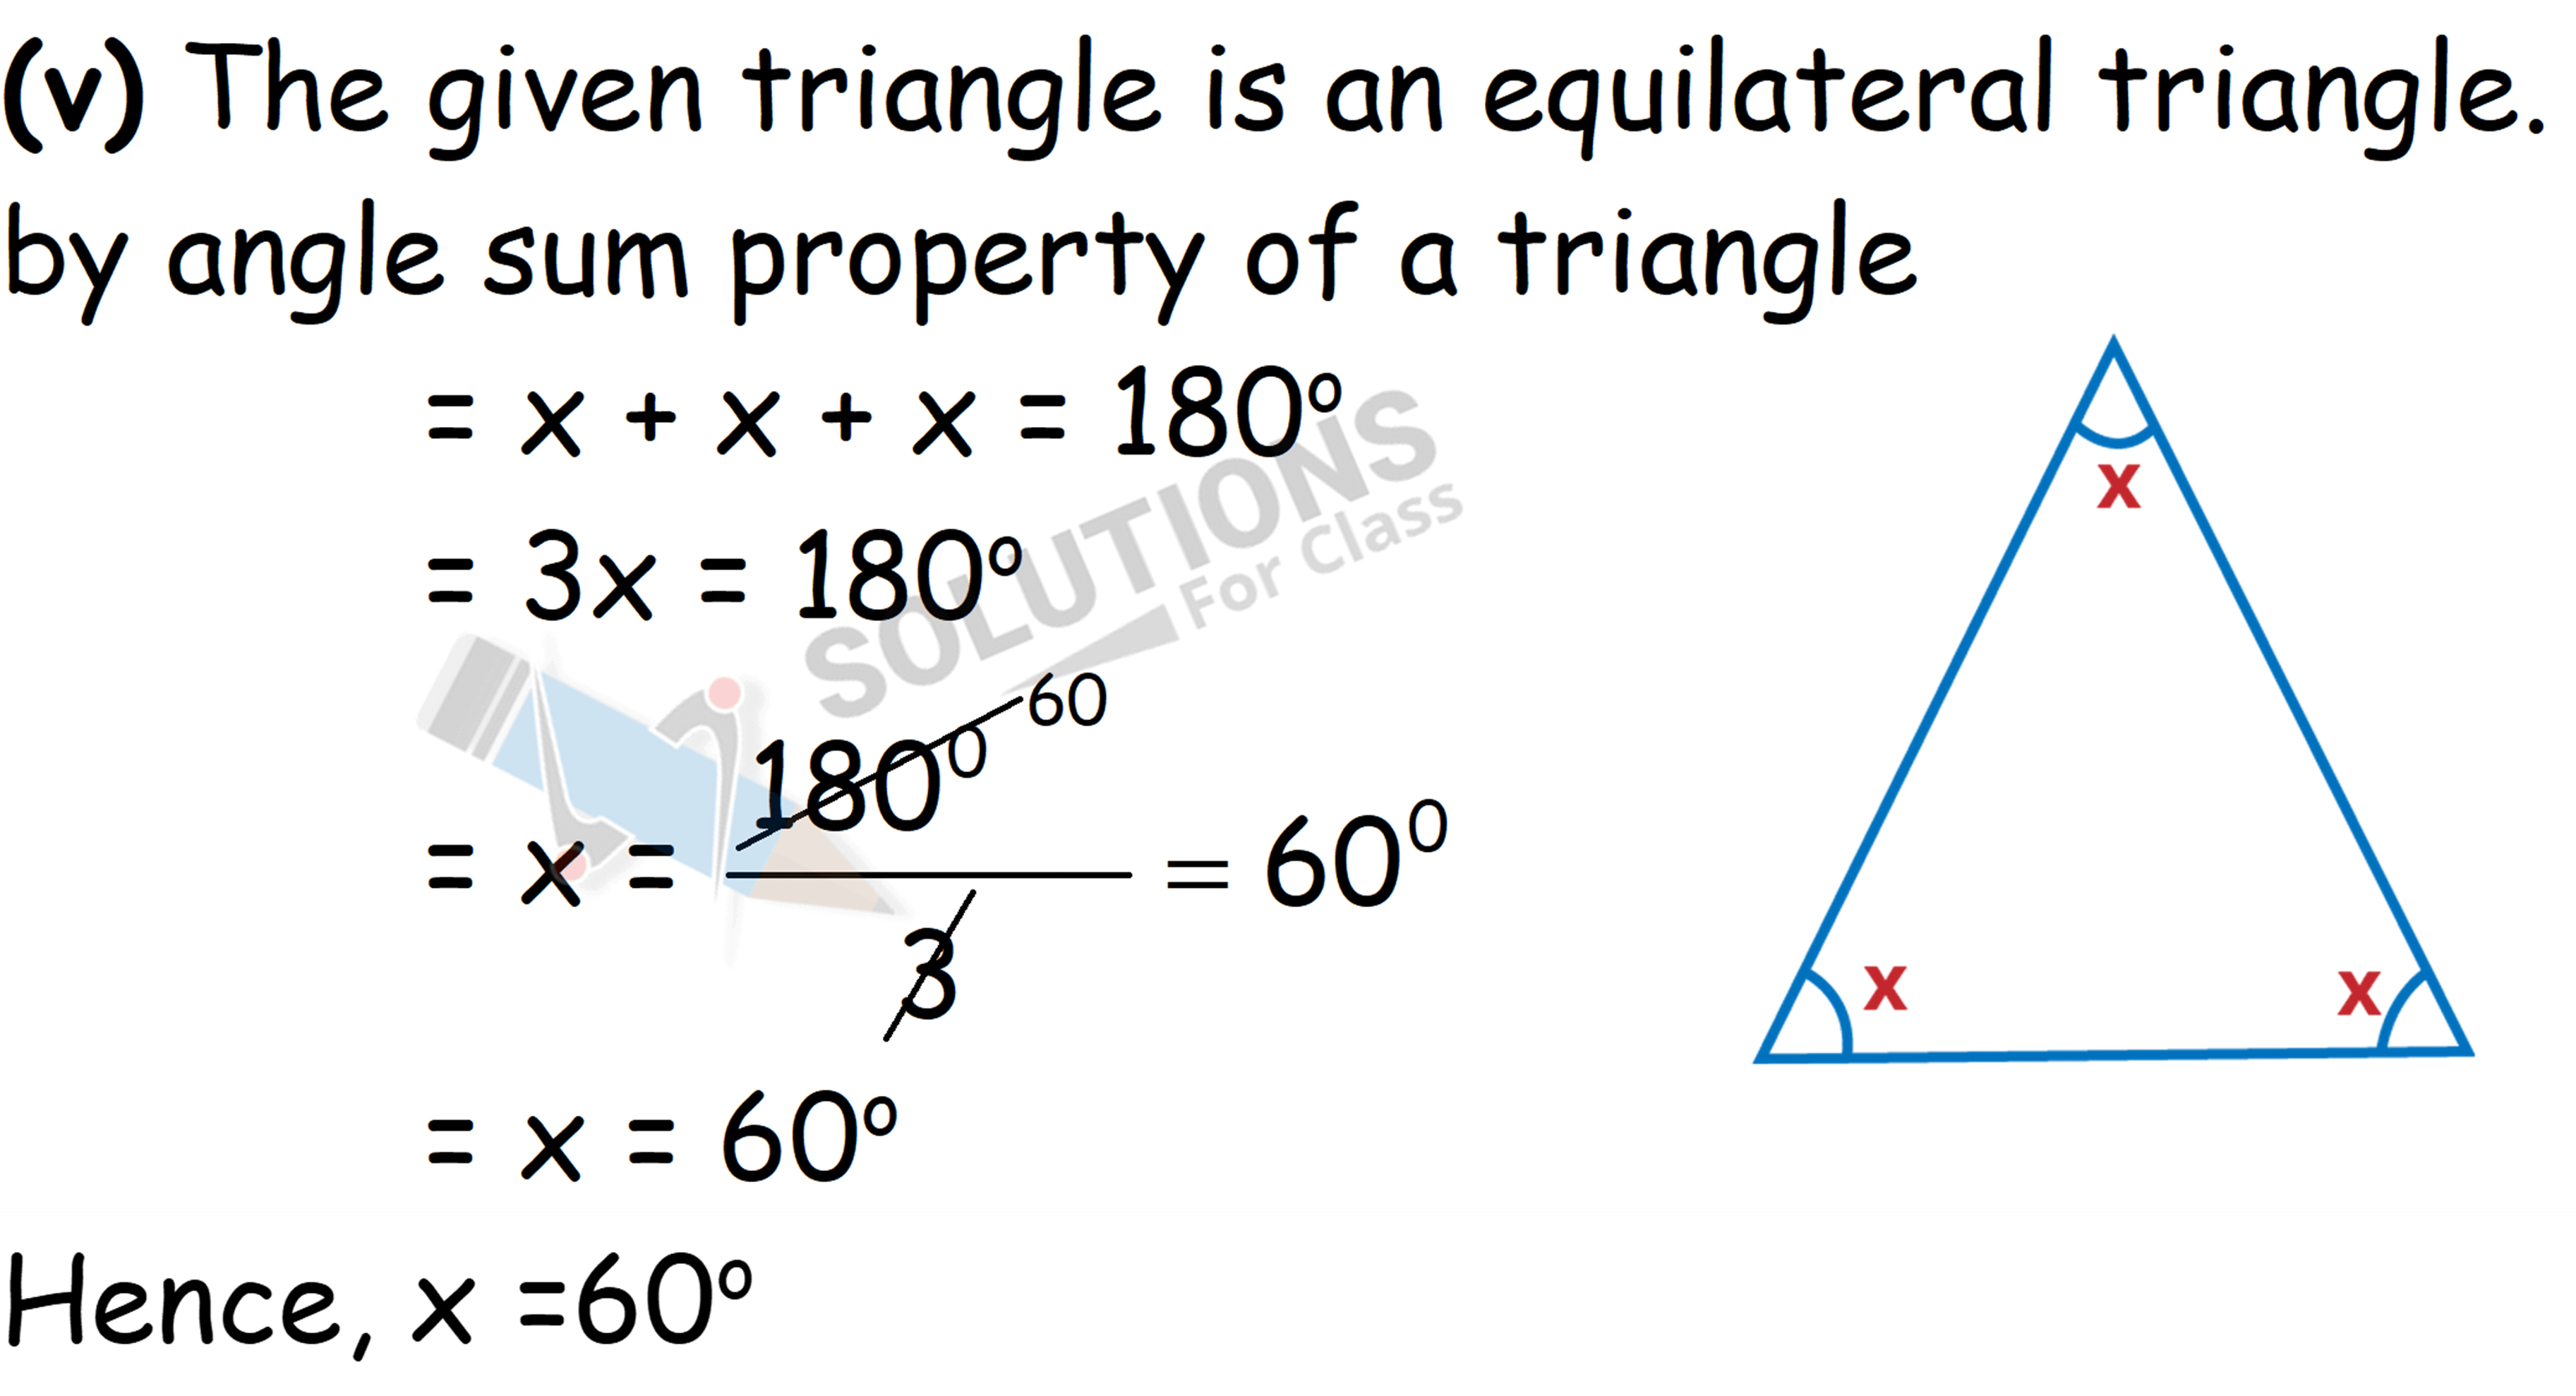 NCERT Solutions Class 7 Maths Chapter 6 The Triangle and its Properties Ex.6.3 Q.1 (v)